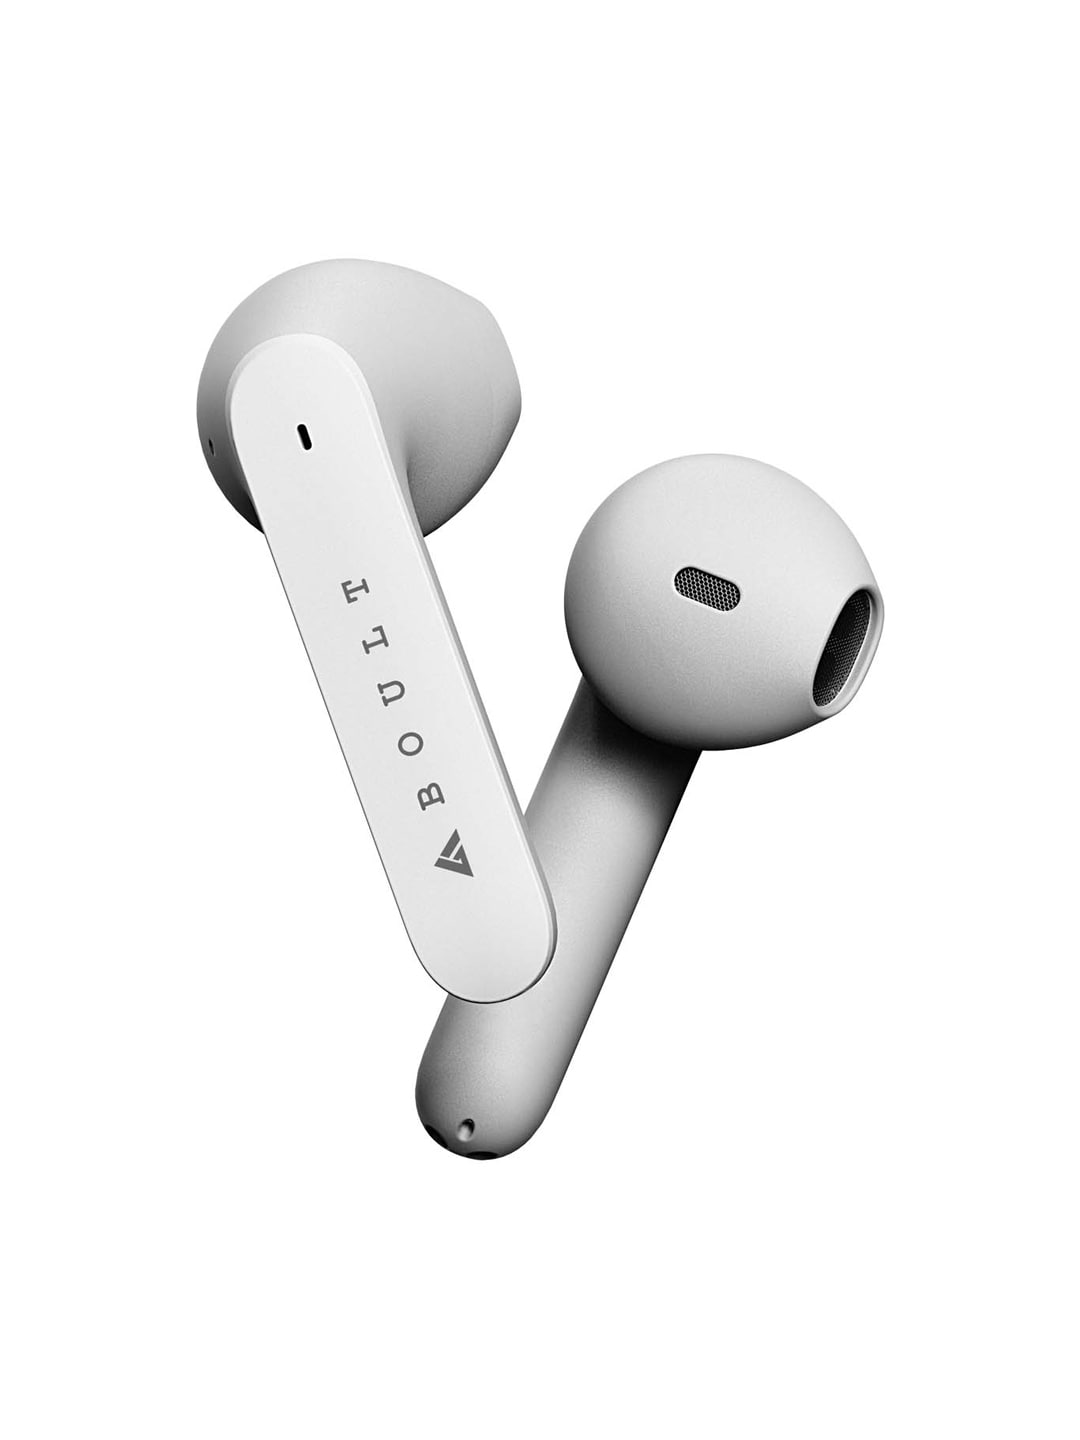 BOULT AUDIO AirBass Probuds True Wireless Bluetooth Earbuds - White Price in India